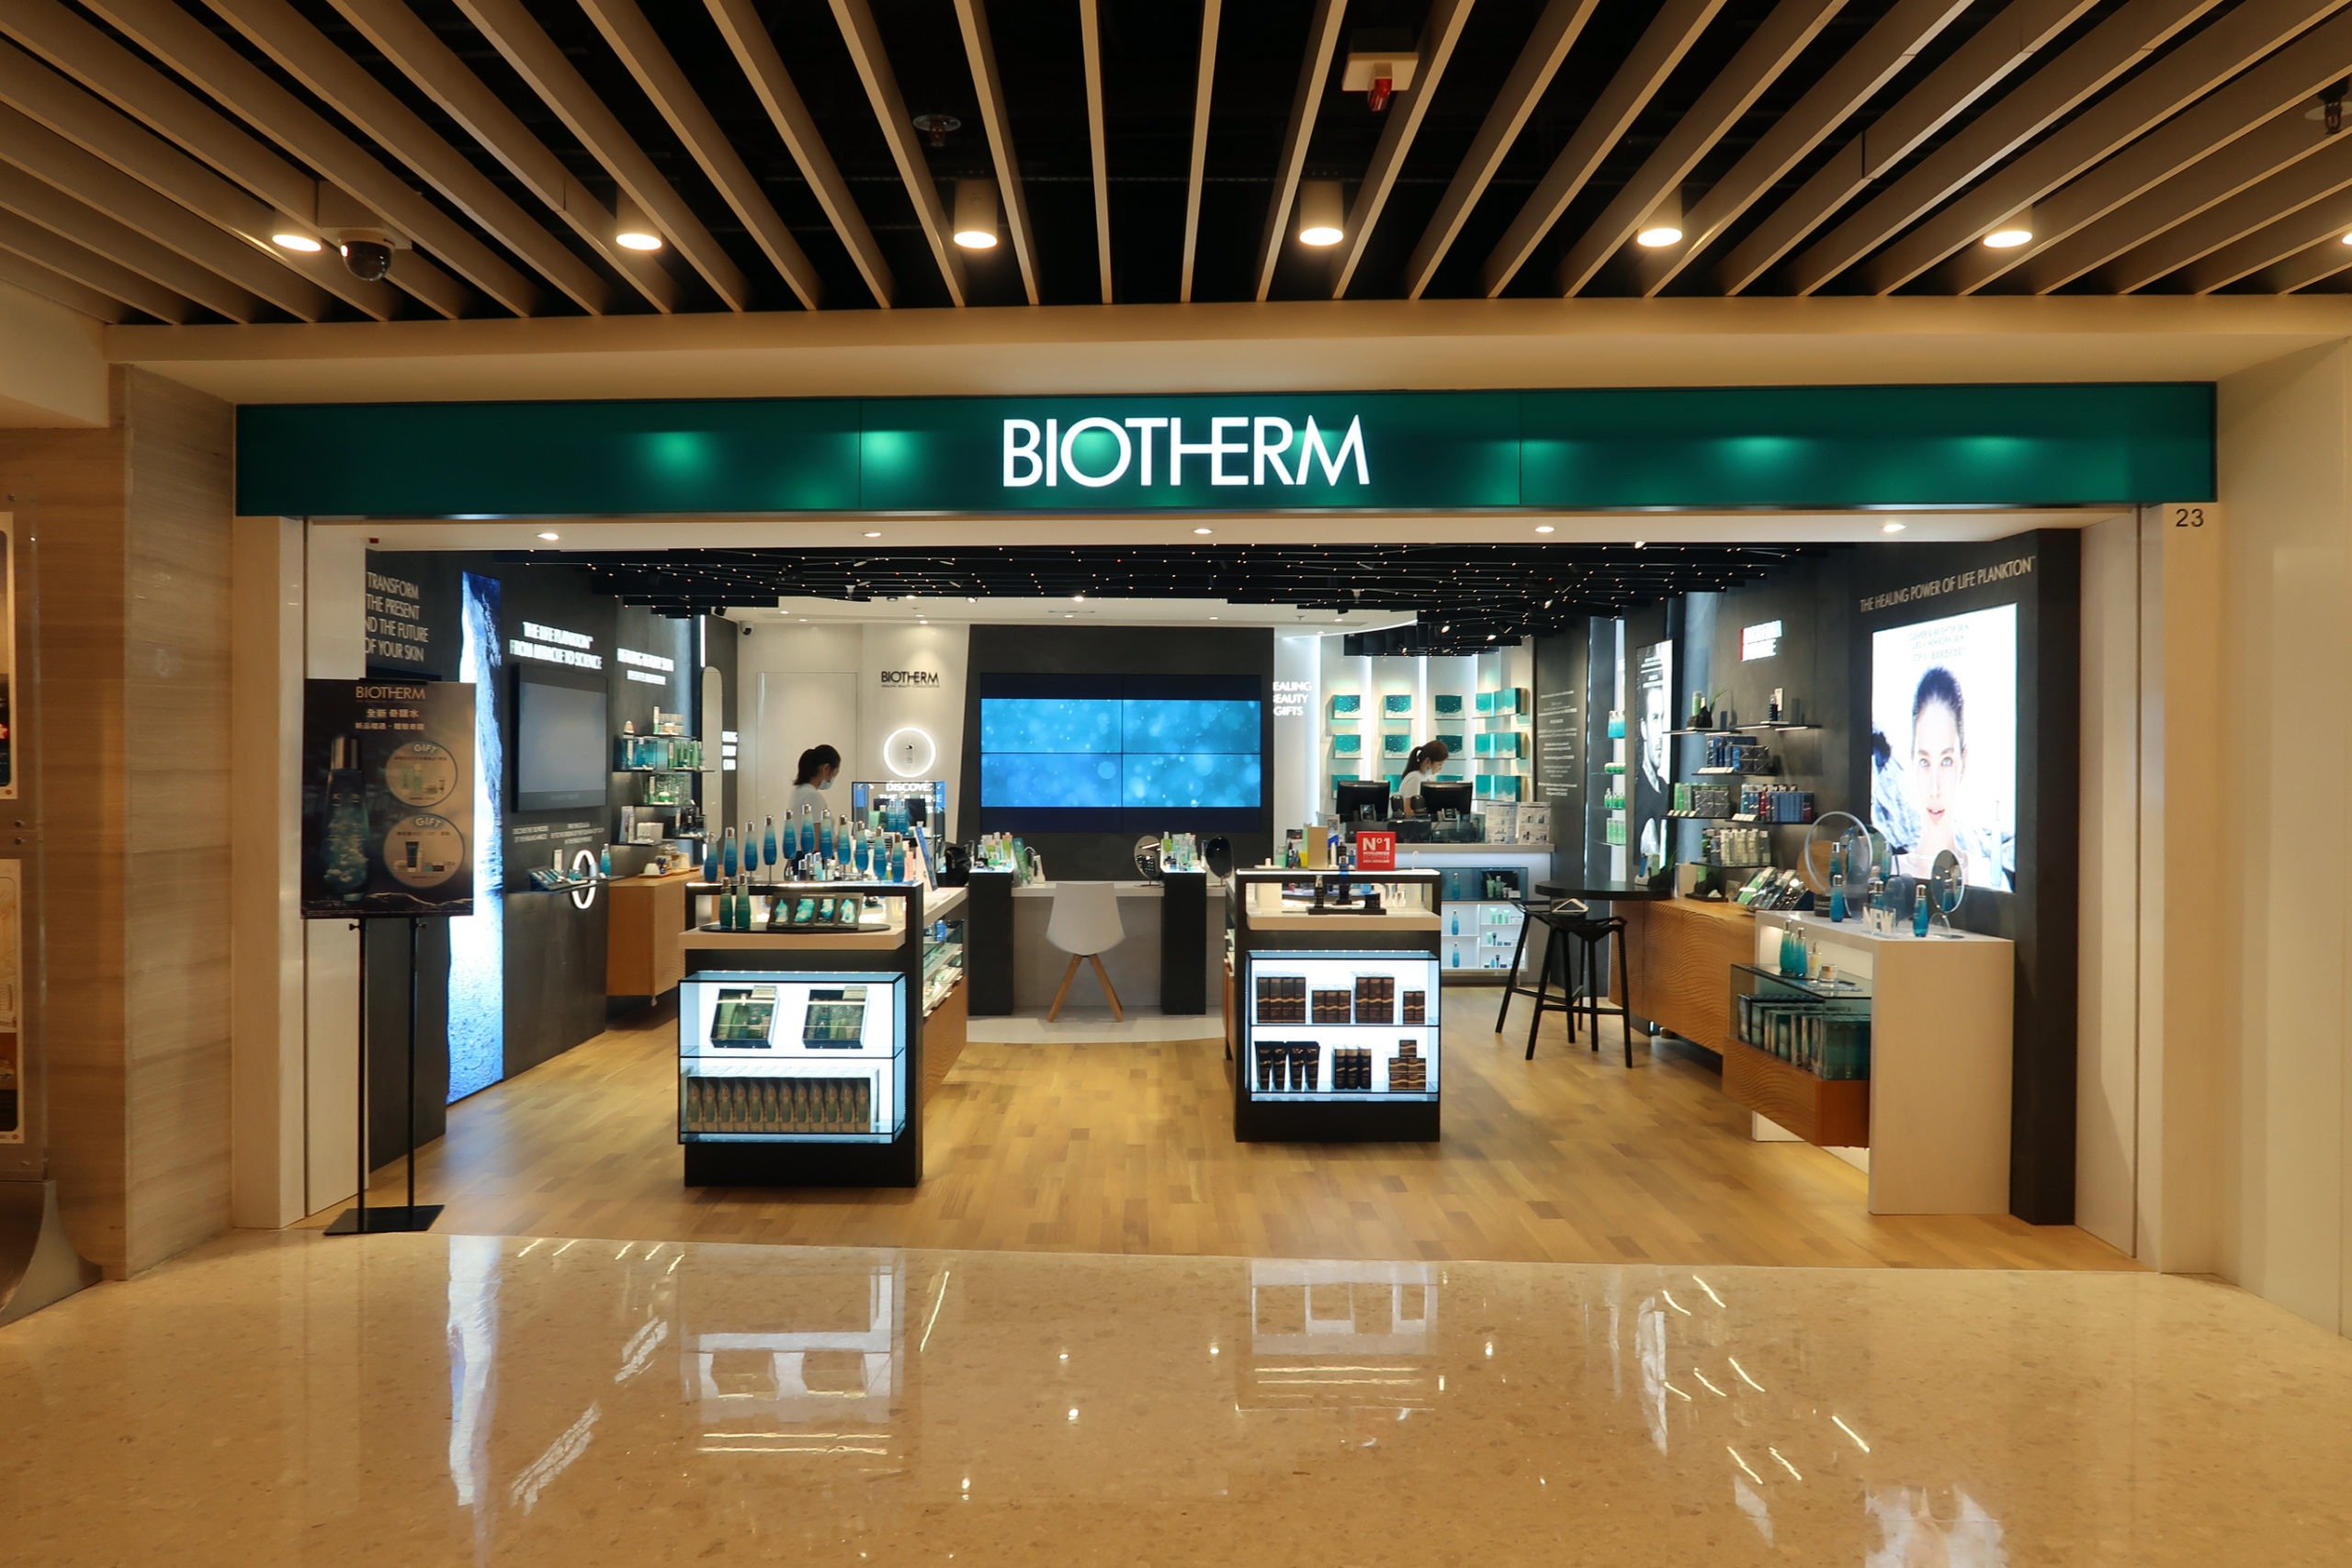 Biotherm in Citylink, Hong Kong